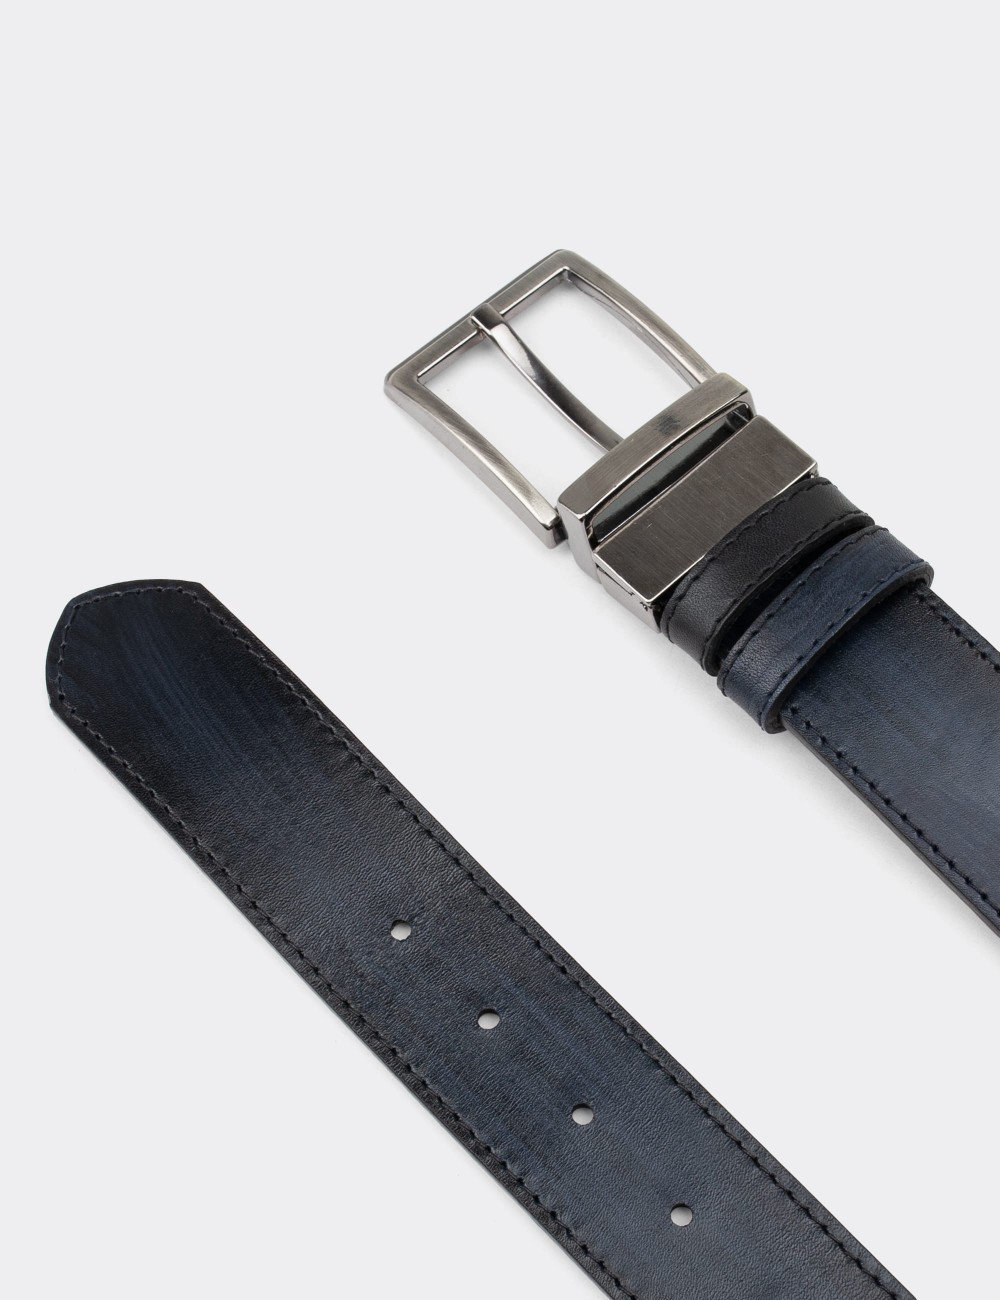  Leather Navy and Black Double Sided Men's Belt - K0409MLCVW01